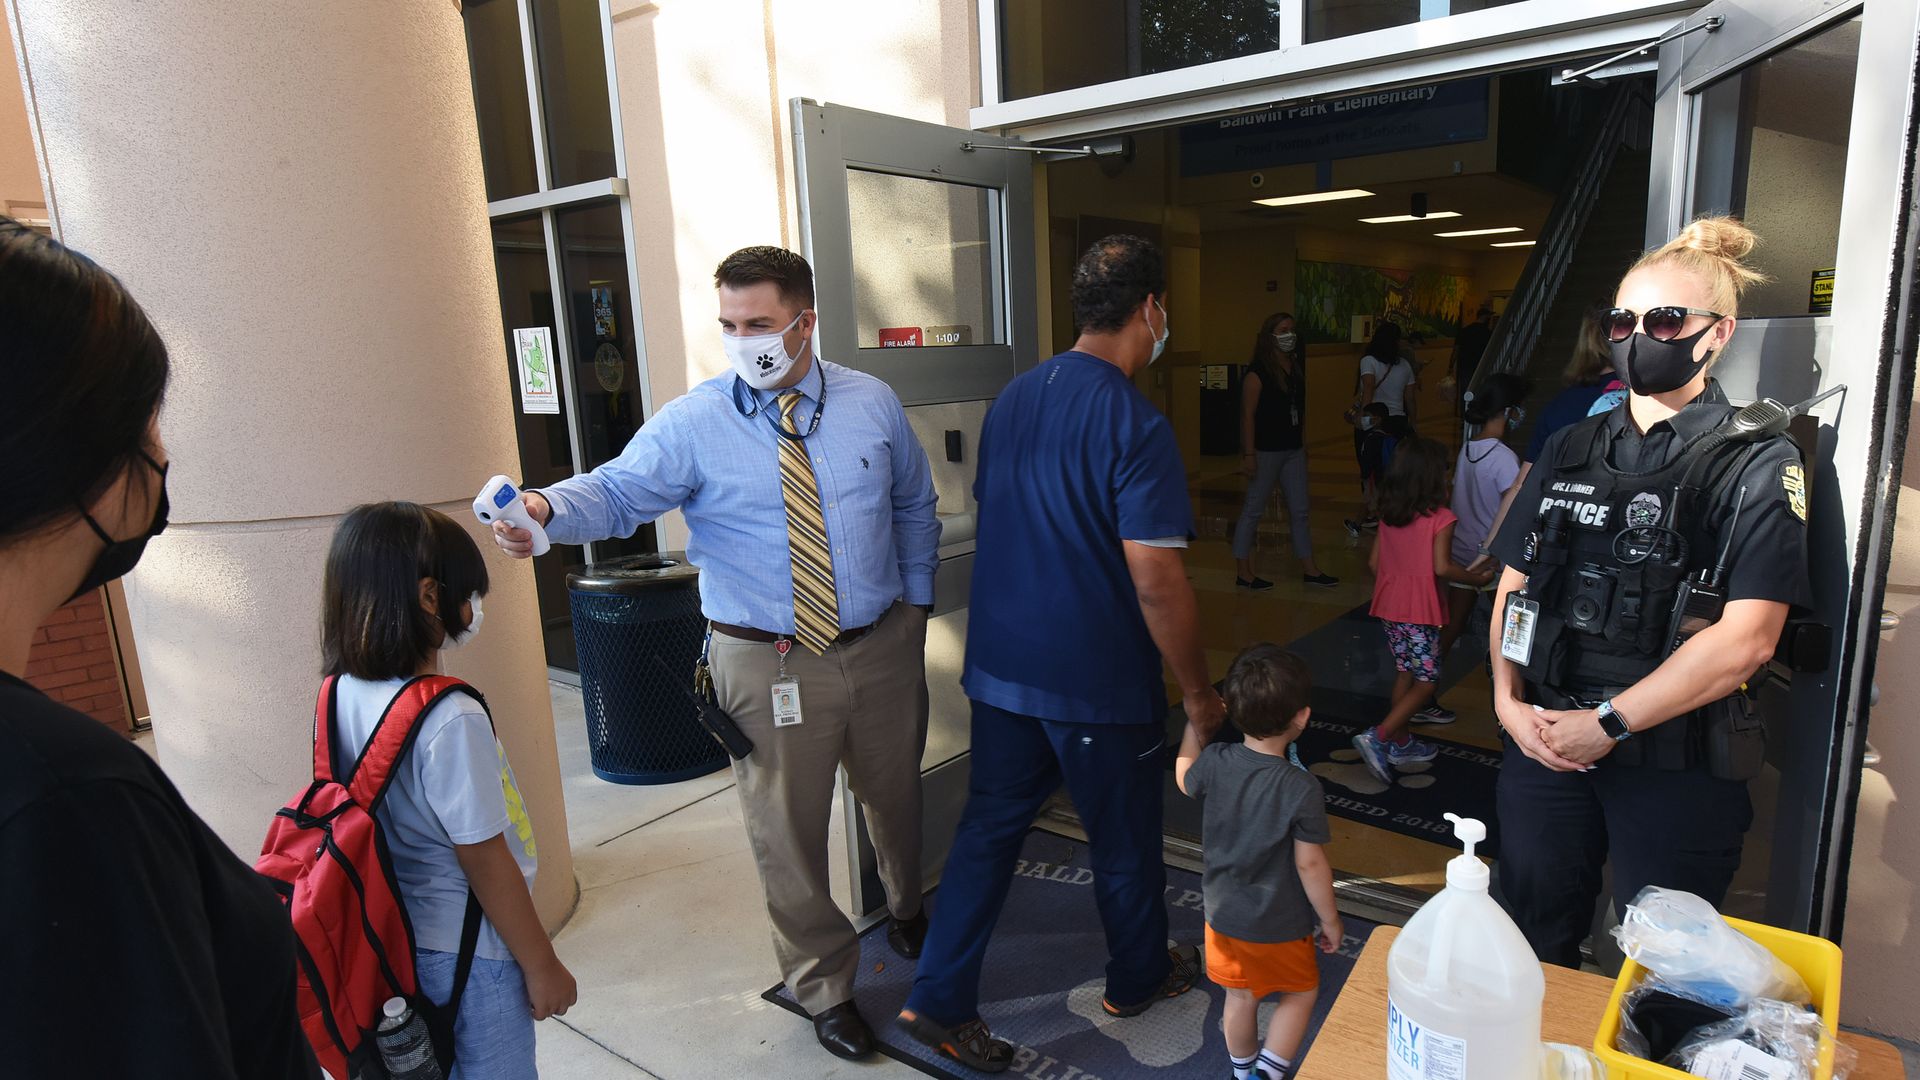 Principal Nathan Hay performs temperature checks on students as they arrive on the first day of classes at Baldwin Park Elementary School in Florida.